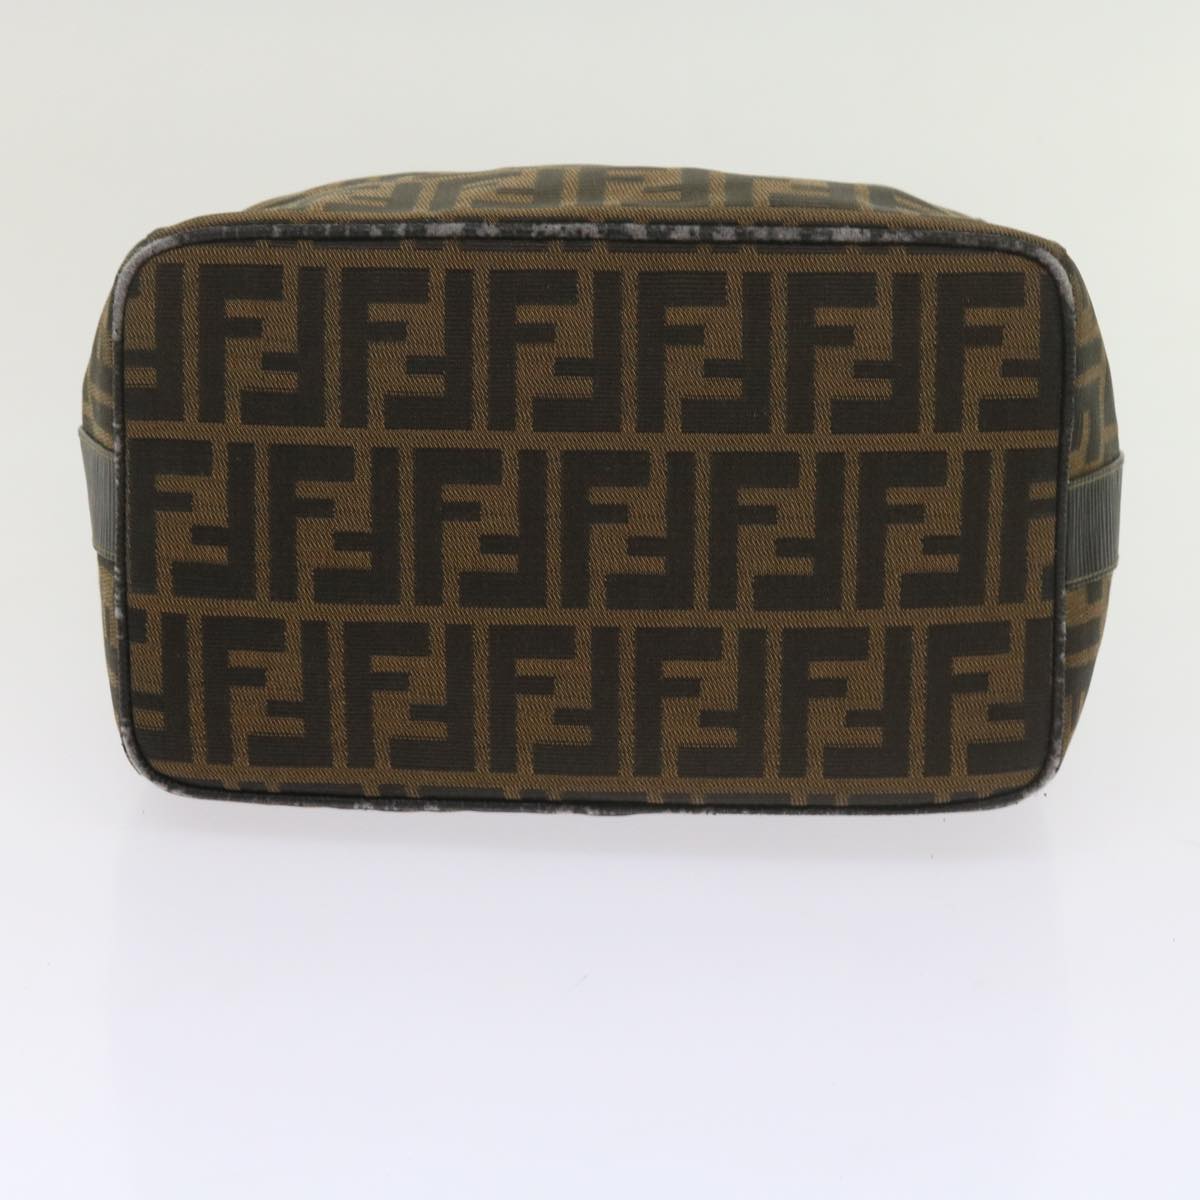 FENDI Zucca Canvas Vanity Cosmetic Pouch Black Brown Auth 60536